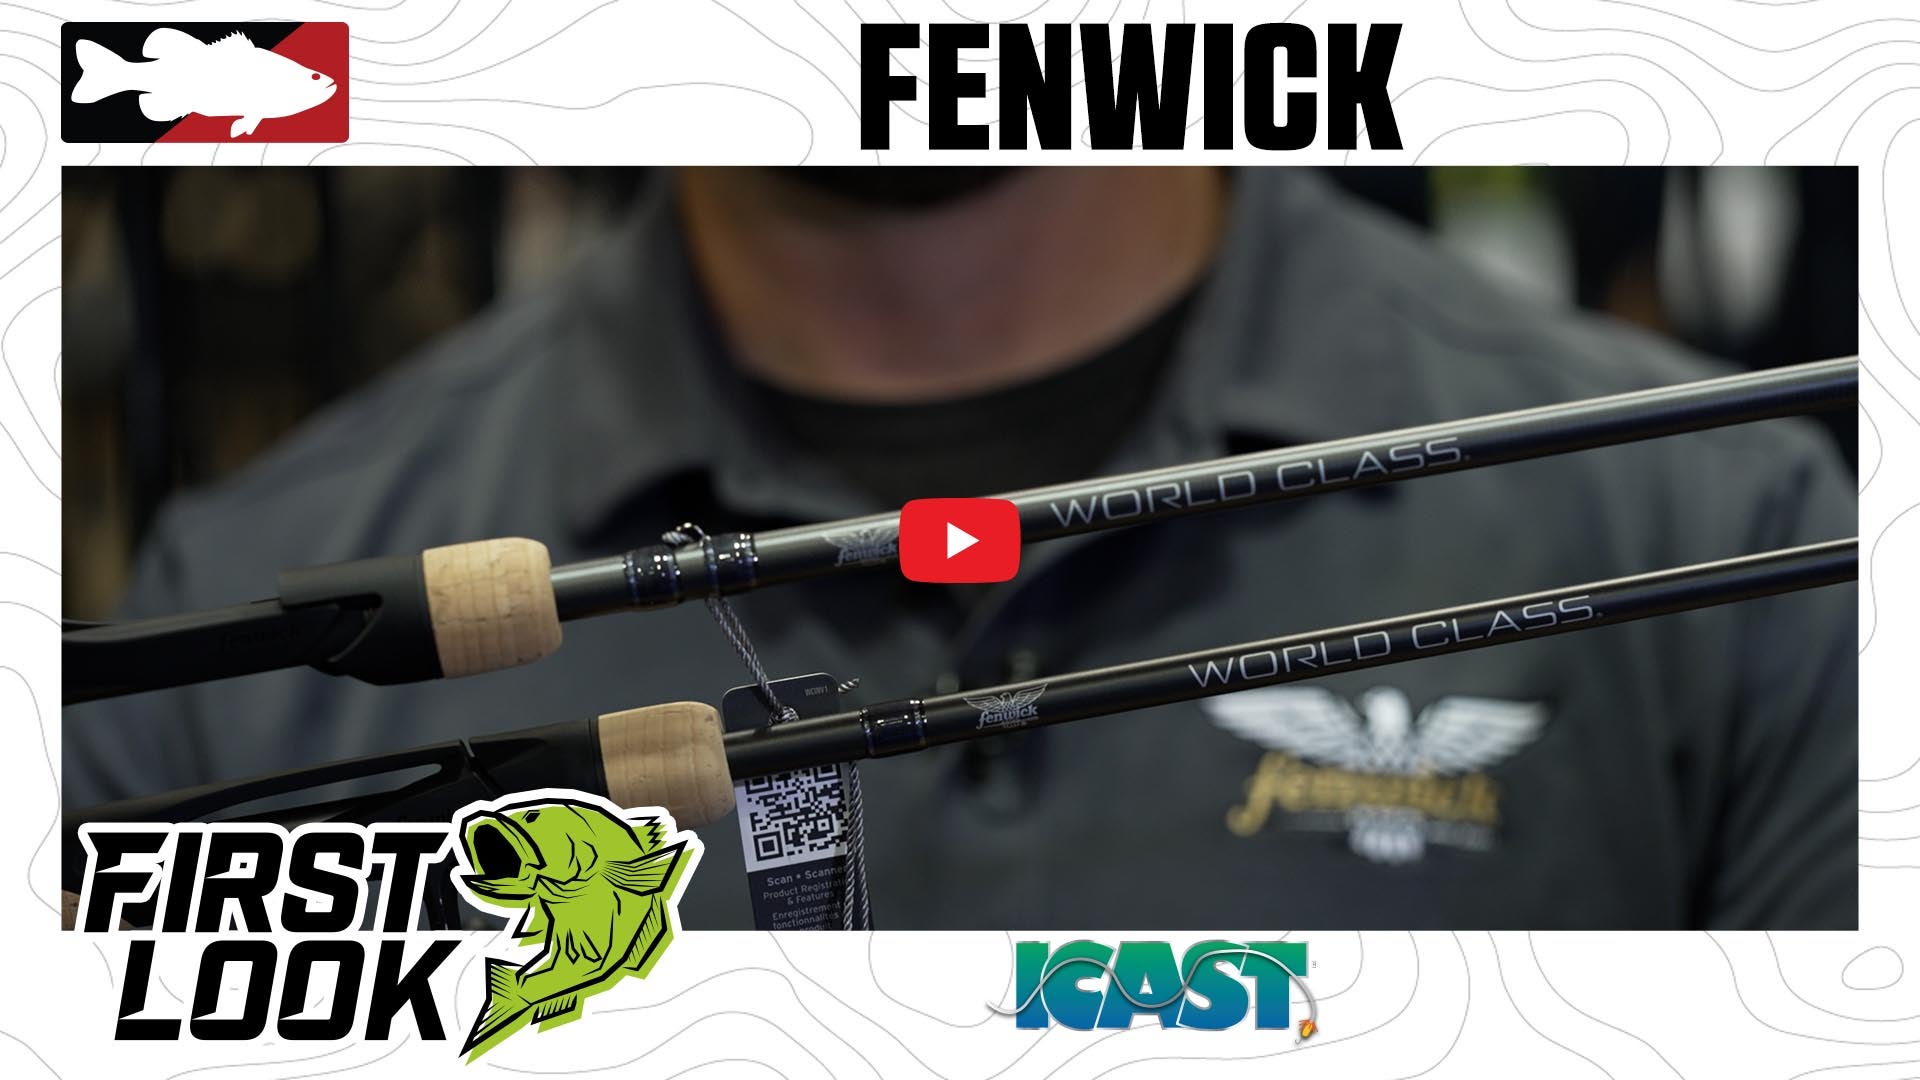 ICAST 2022 Videos - Fenwick World Class Rods with Dave Brinkerhoff